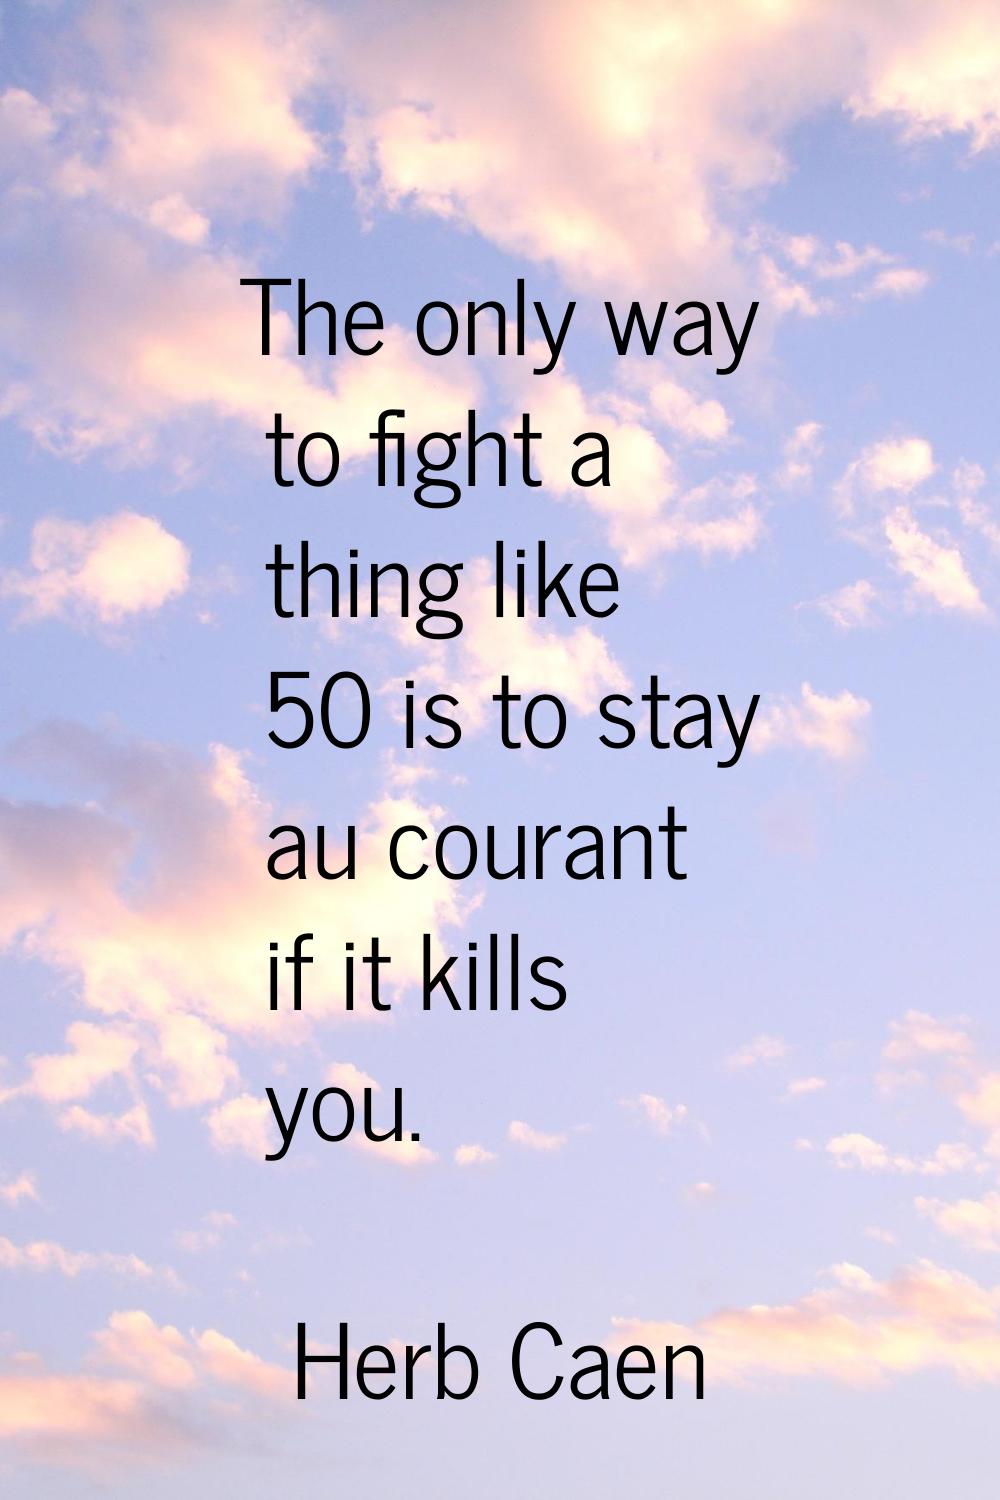 The only way to fight a thing like 50 is to stay au courant if it kills you.